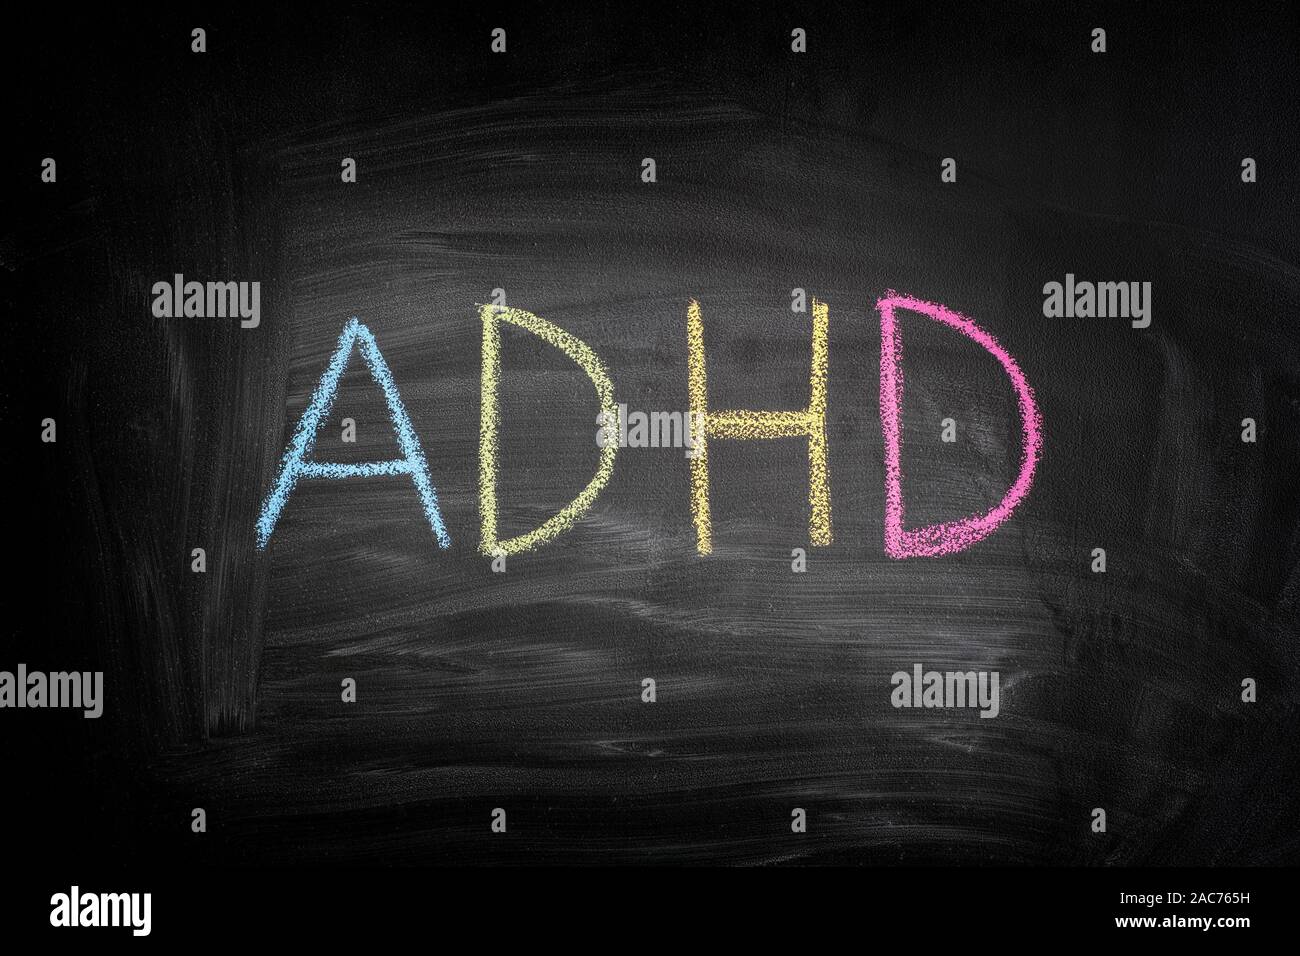 ADHD. Abbreviation ADHD on a blackboard. ADHD is Attention deficit hyperactivity disorder. Stock Photo